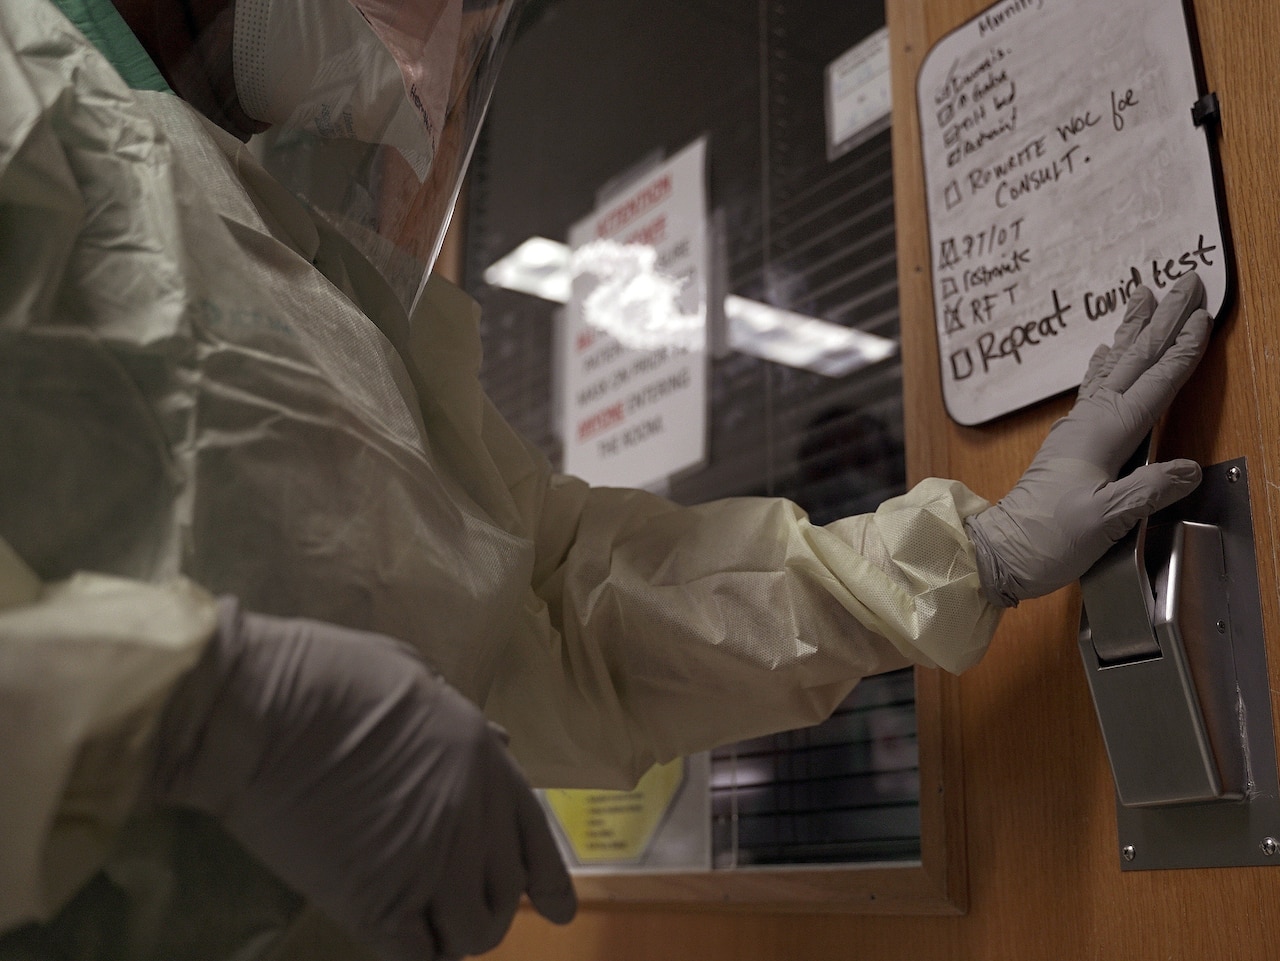 A medical professional wearing protective gear opens a hospital room door with patient notes on the door.